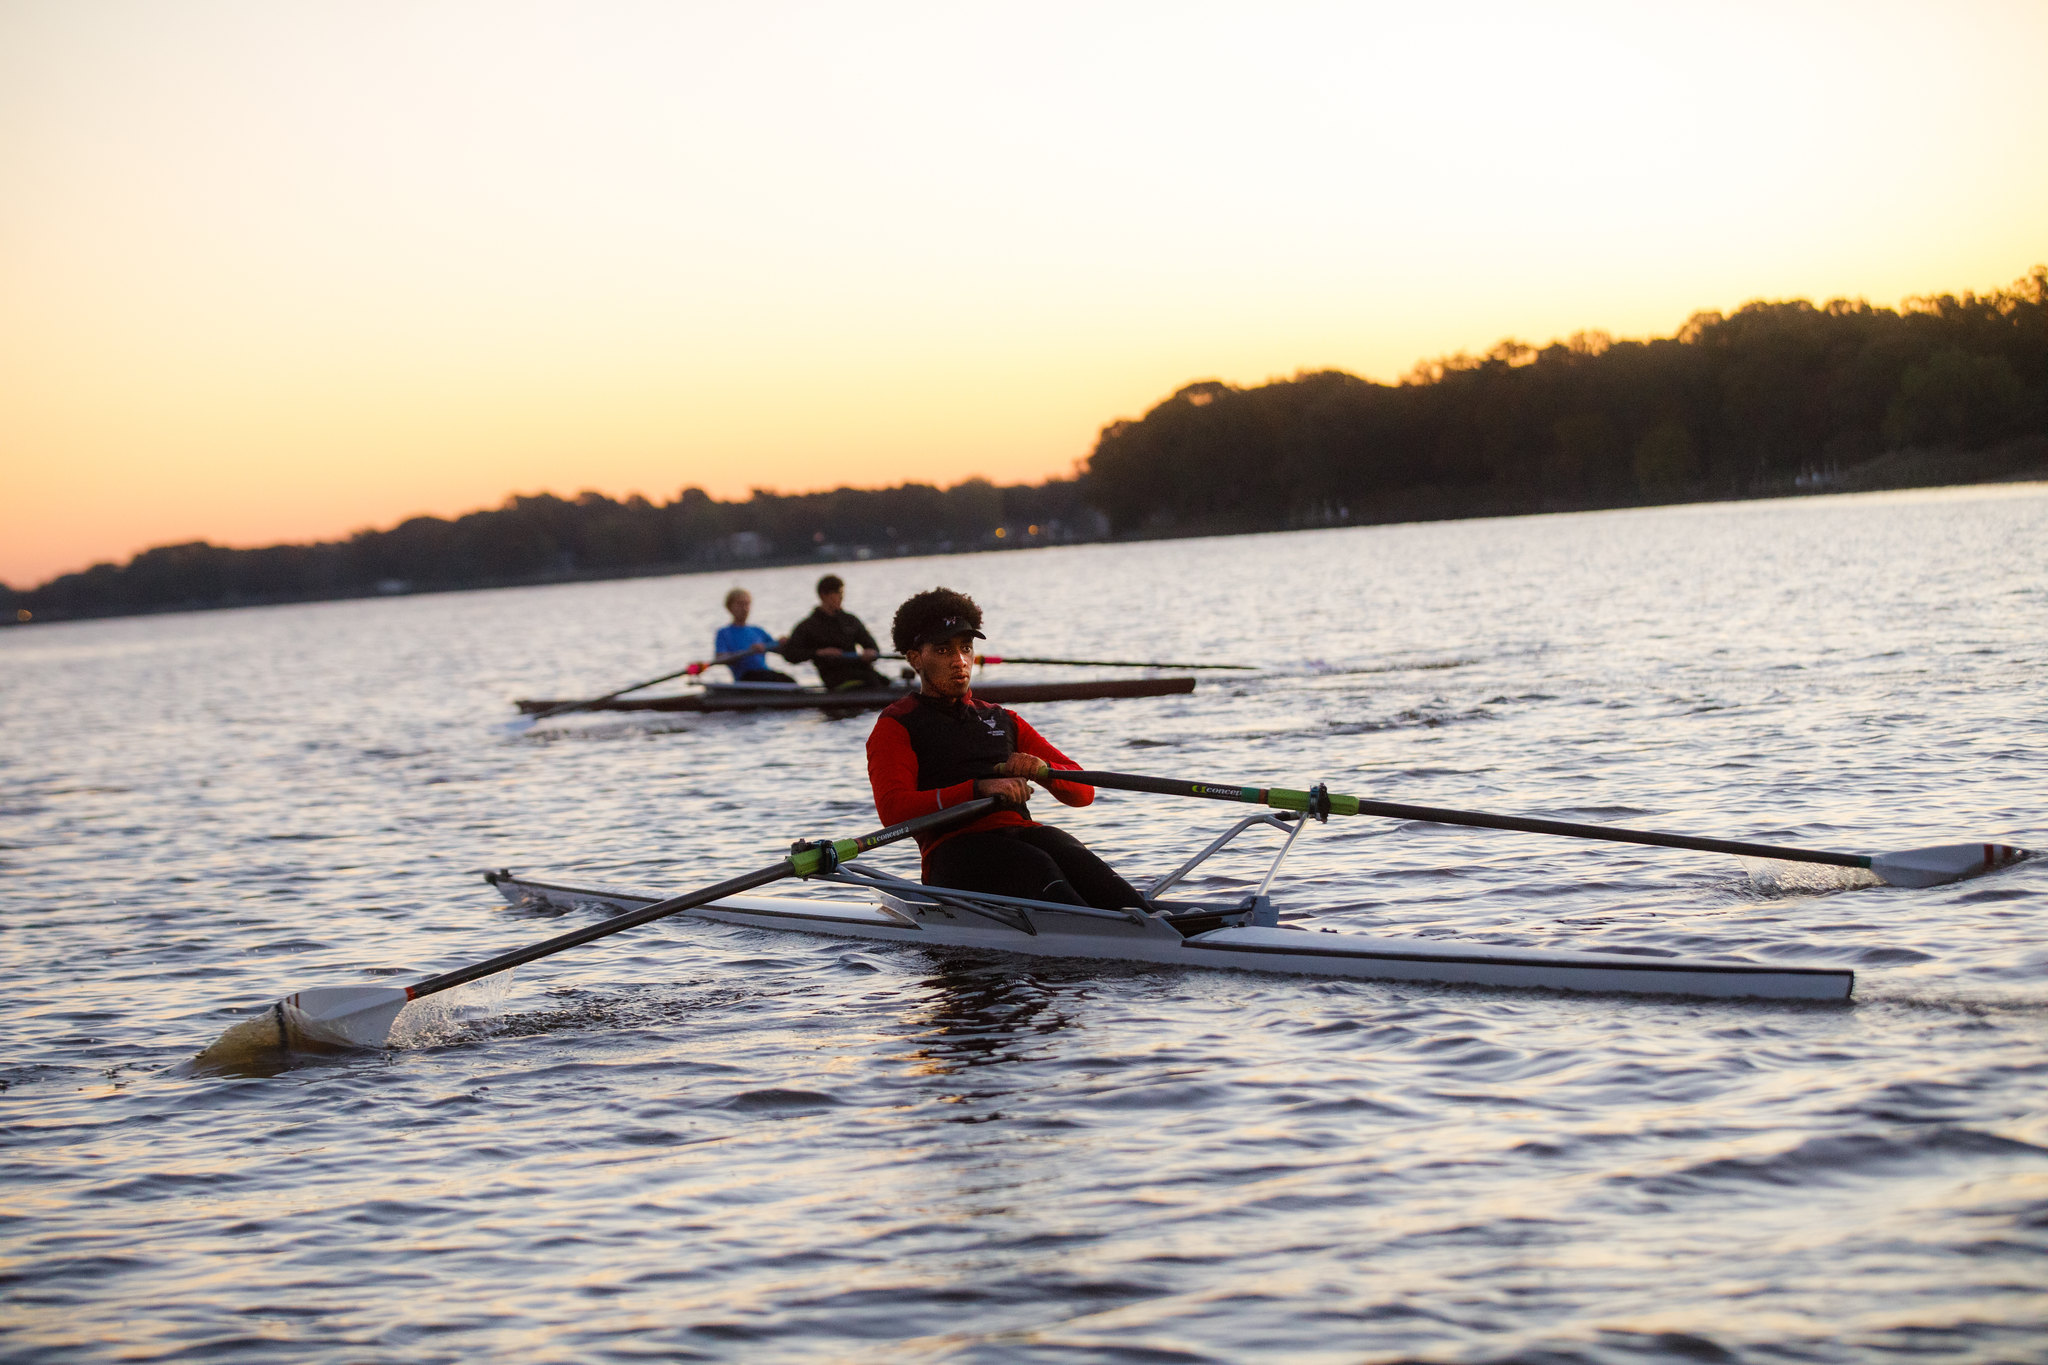 Washington College undergrad rower rows on the Chester River